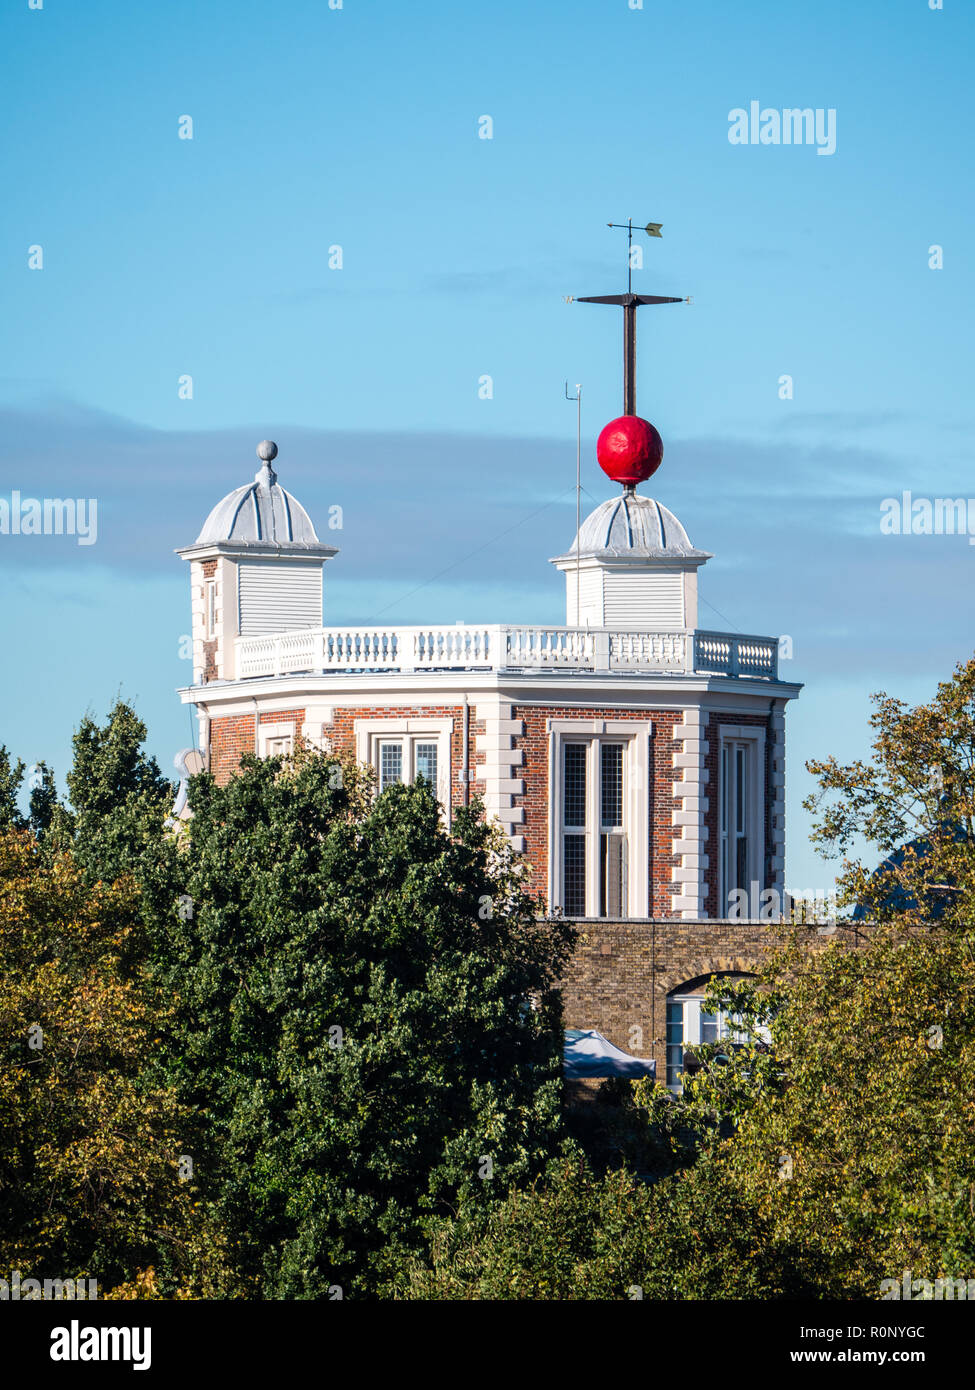 Octogen Room, with Red Time Ball, Royal Observatory, Greenwich, London, England, GB Stock Photo - Alamy